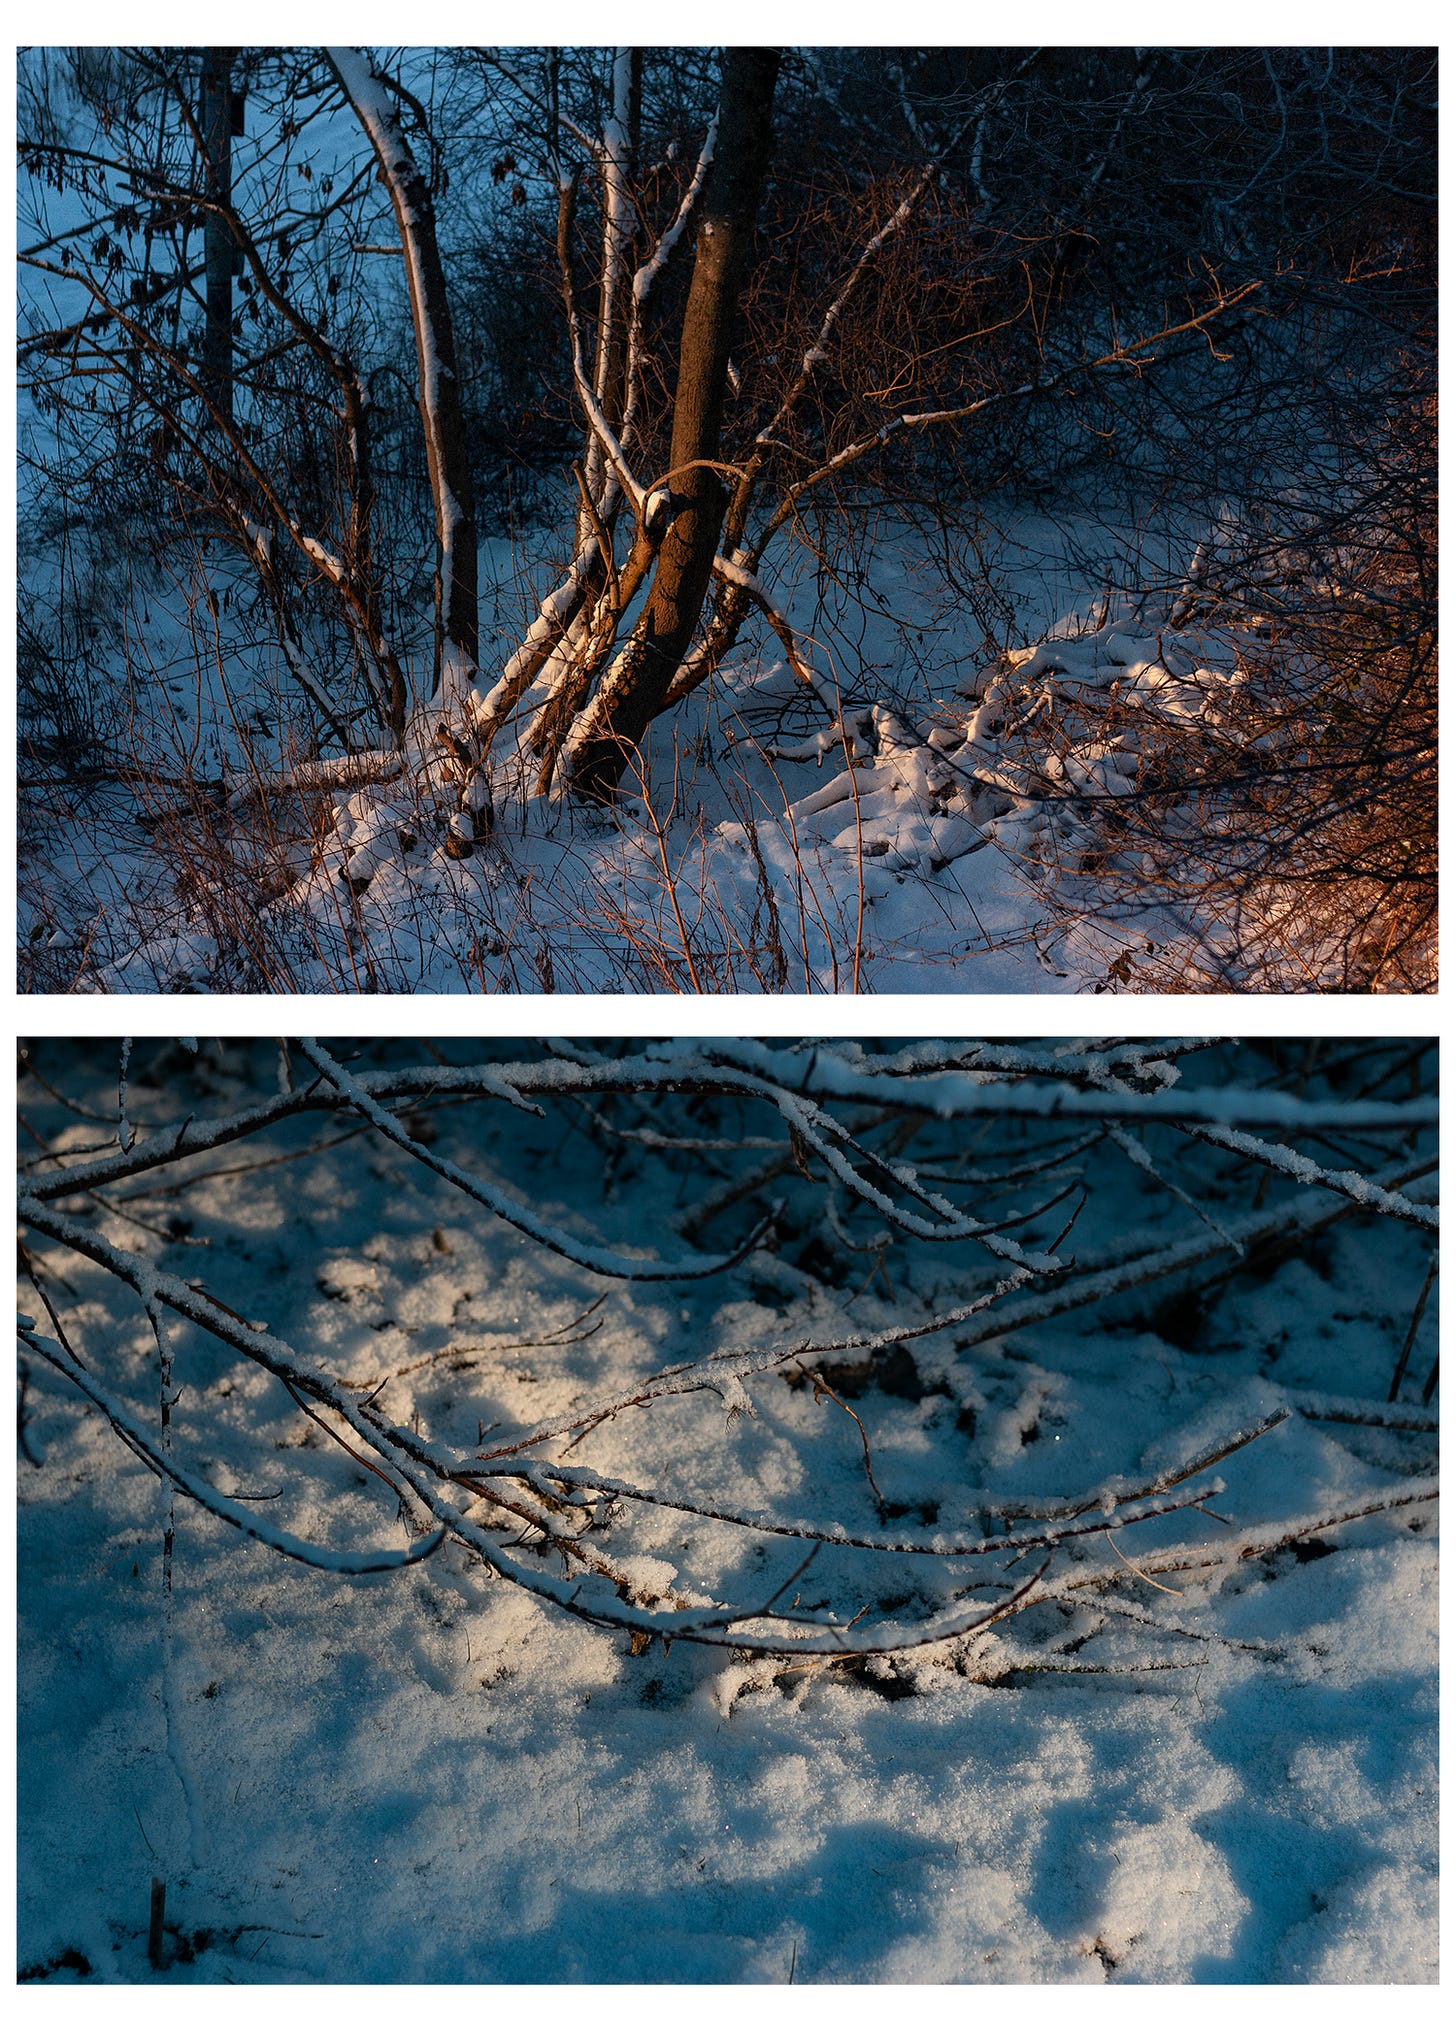 Top photograph is the bottom of a tree, covered in snow and bathed in orange light, the shadows on the snow are a bright blue. Bottom photograph is of a woodland floor, the light is dappling shadows over the snowy ground. 